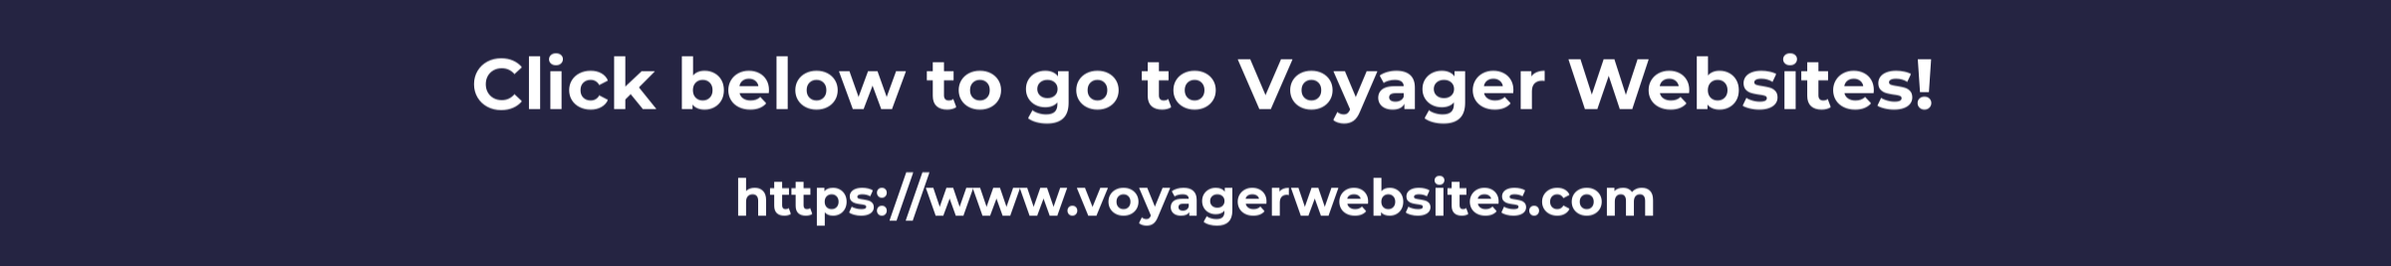 click to go to voyager websites